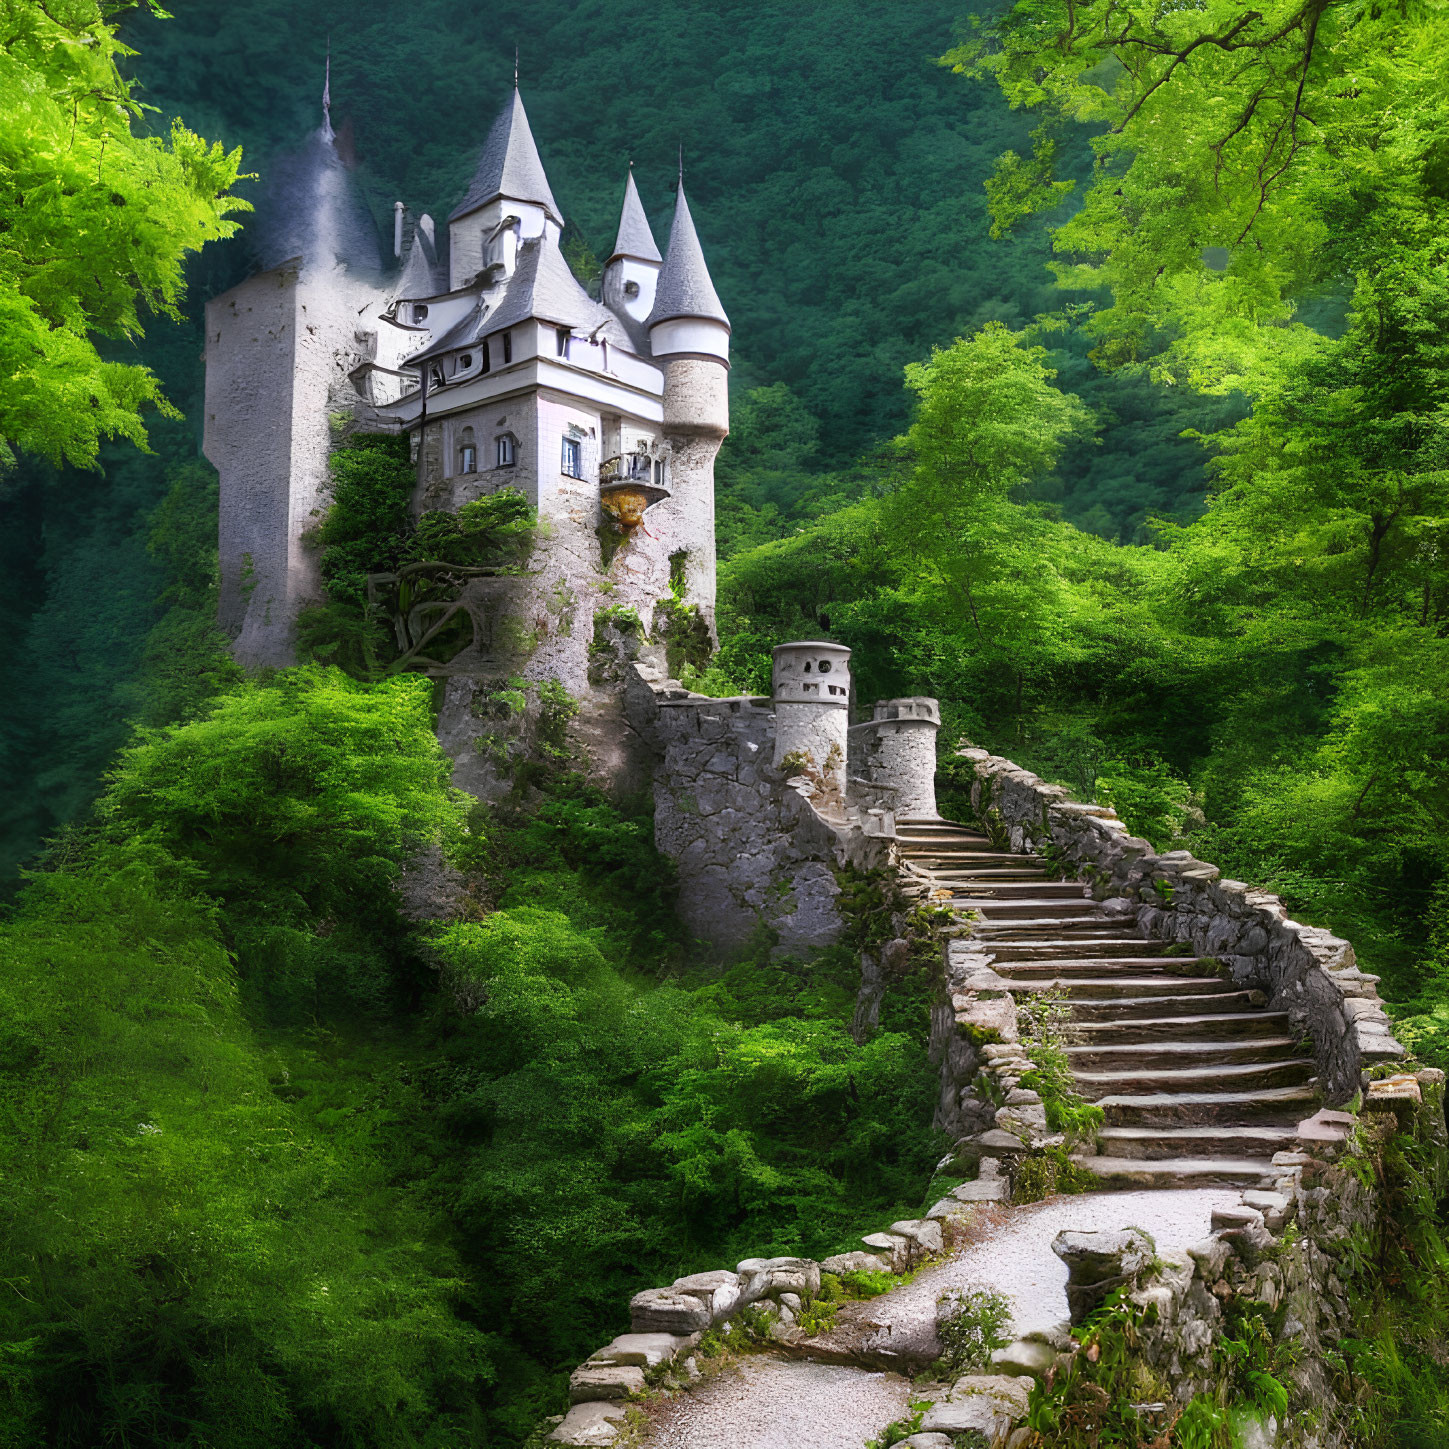 Castle with multiple spires on lush green hillock connected by ancient stone stairway through verdant forest